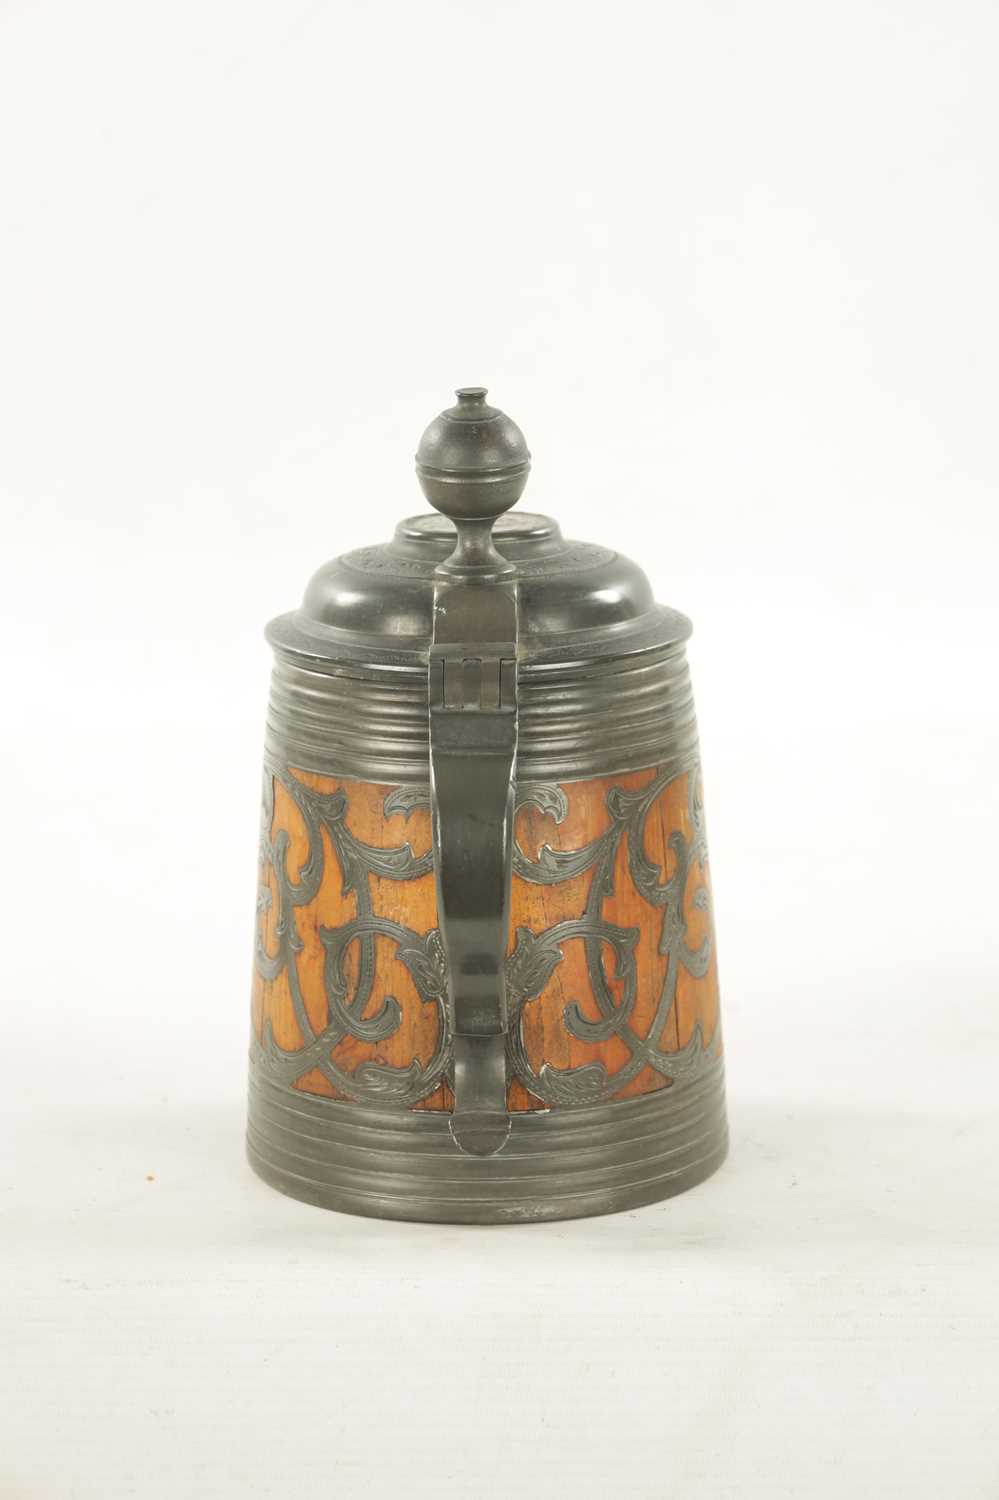 A 19TH CENTURY SWEDISH COMMEMORATIVE OAK AND PEWTER TANKARD - Image 6 of 8